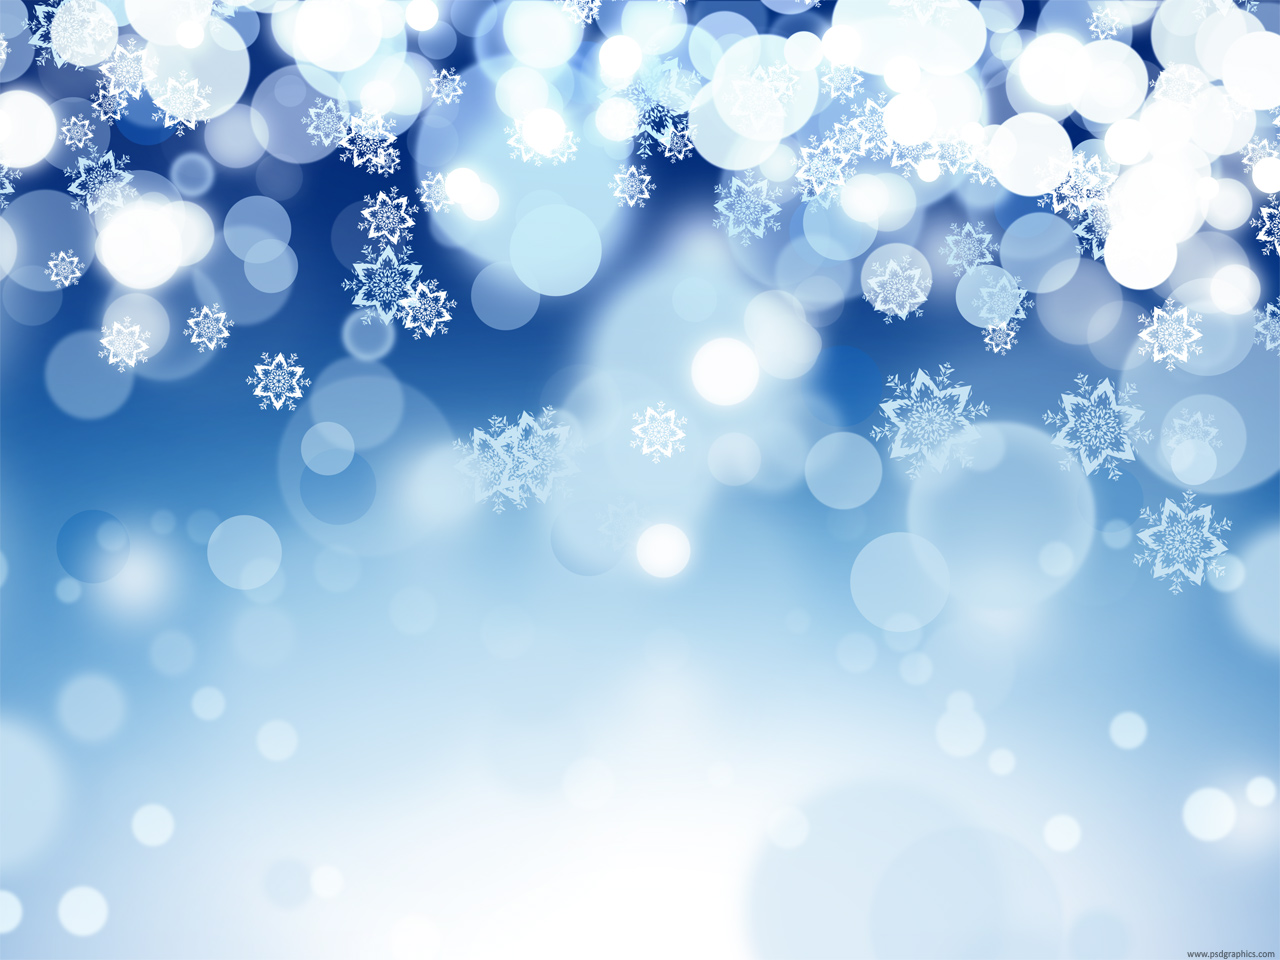 Medium size preview 1280x960px Abstract holiday background